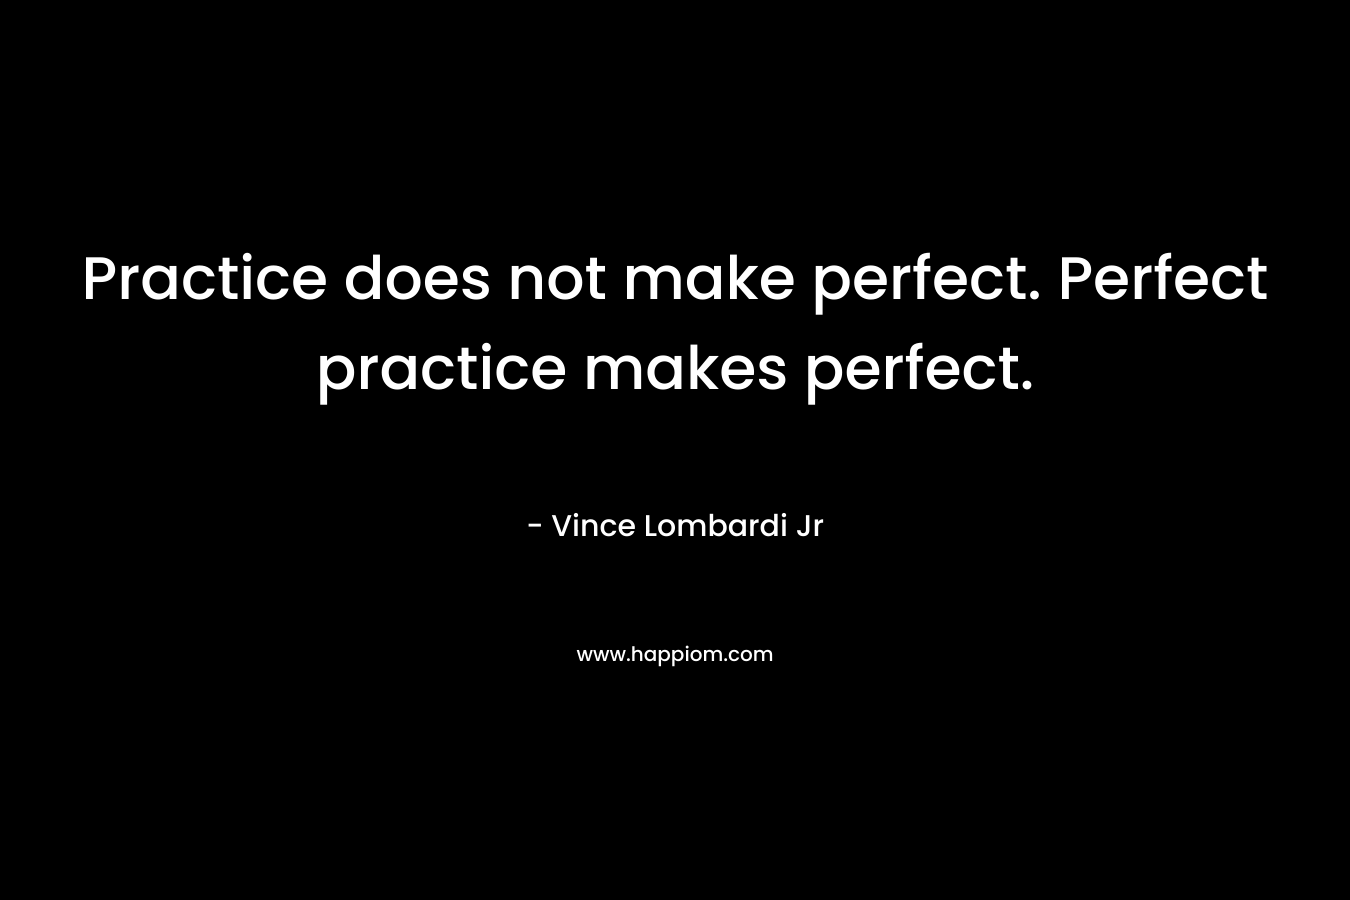 Practice does not make perfect. Perfect practice makes perfect.